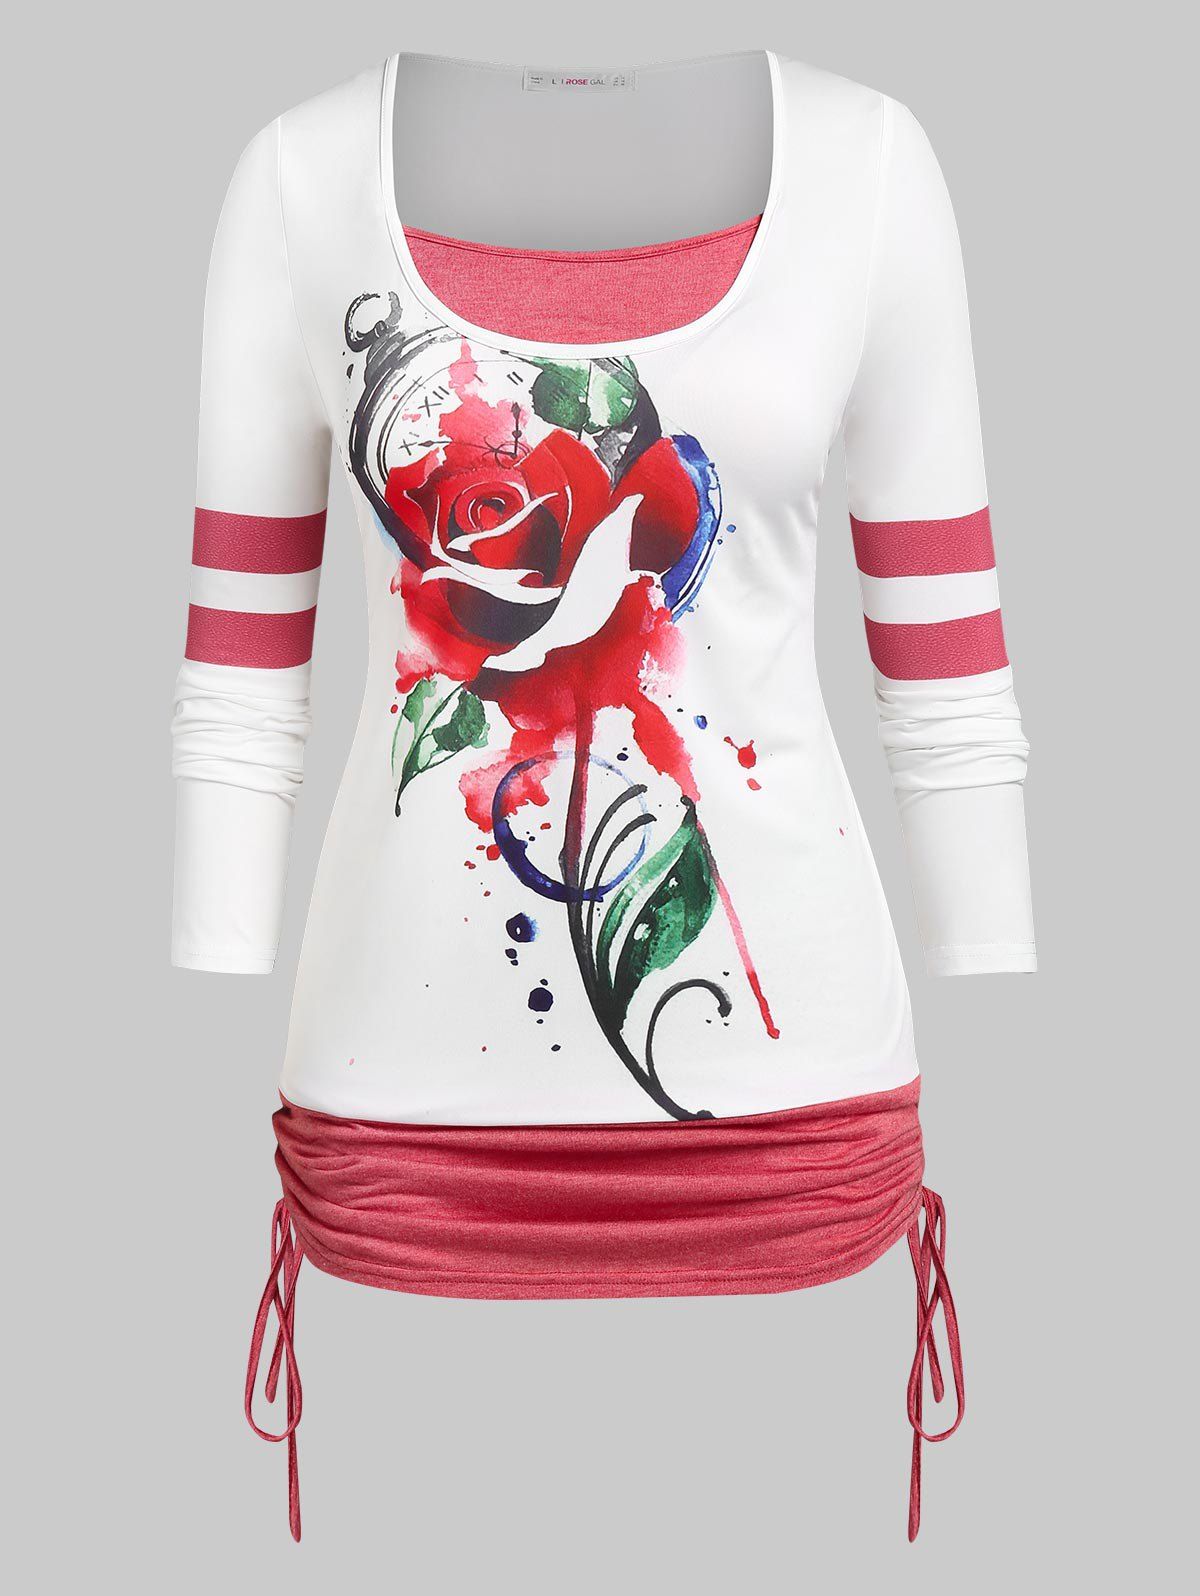 Plus Size Rose Print Cinched 2 in 1 Tee - WHITE L